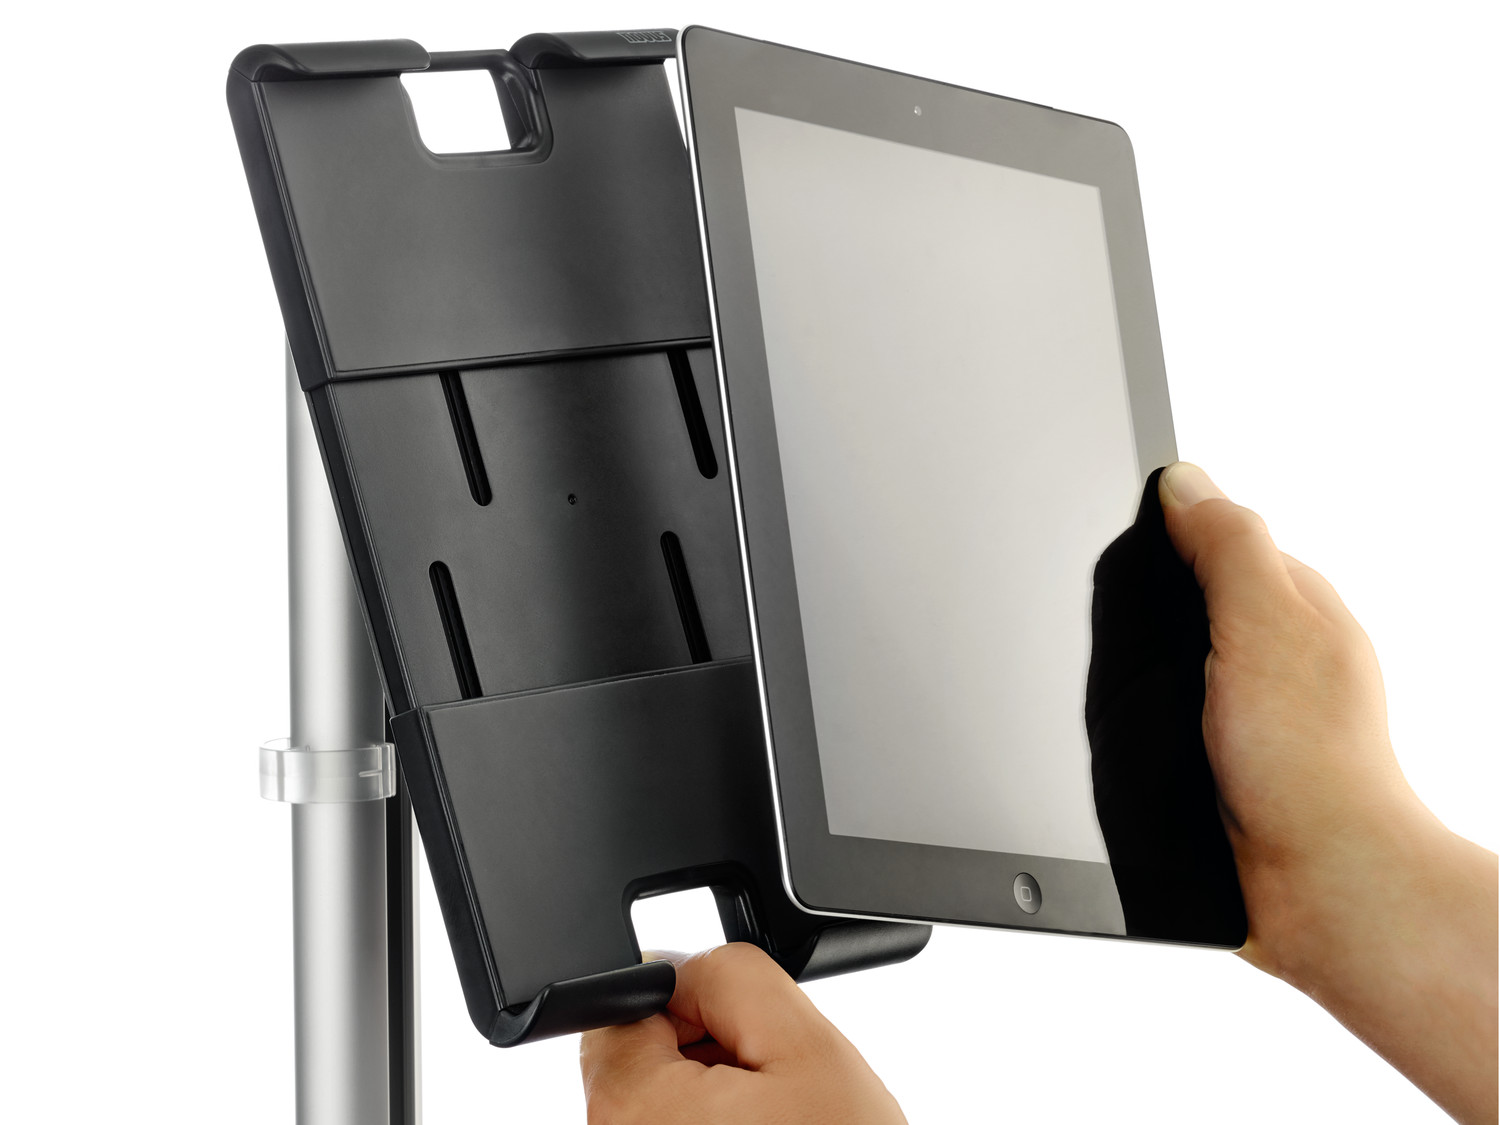 A tablet is easy to insert in portrait format.